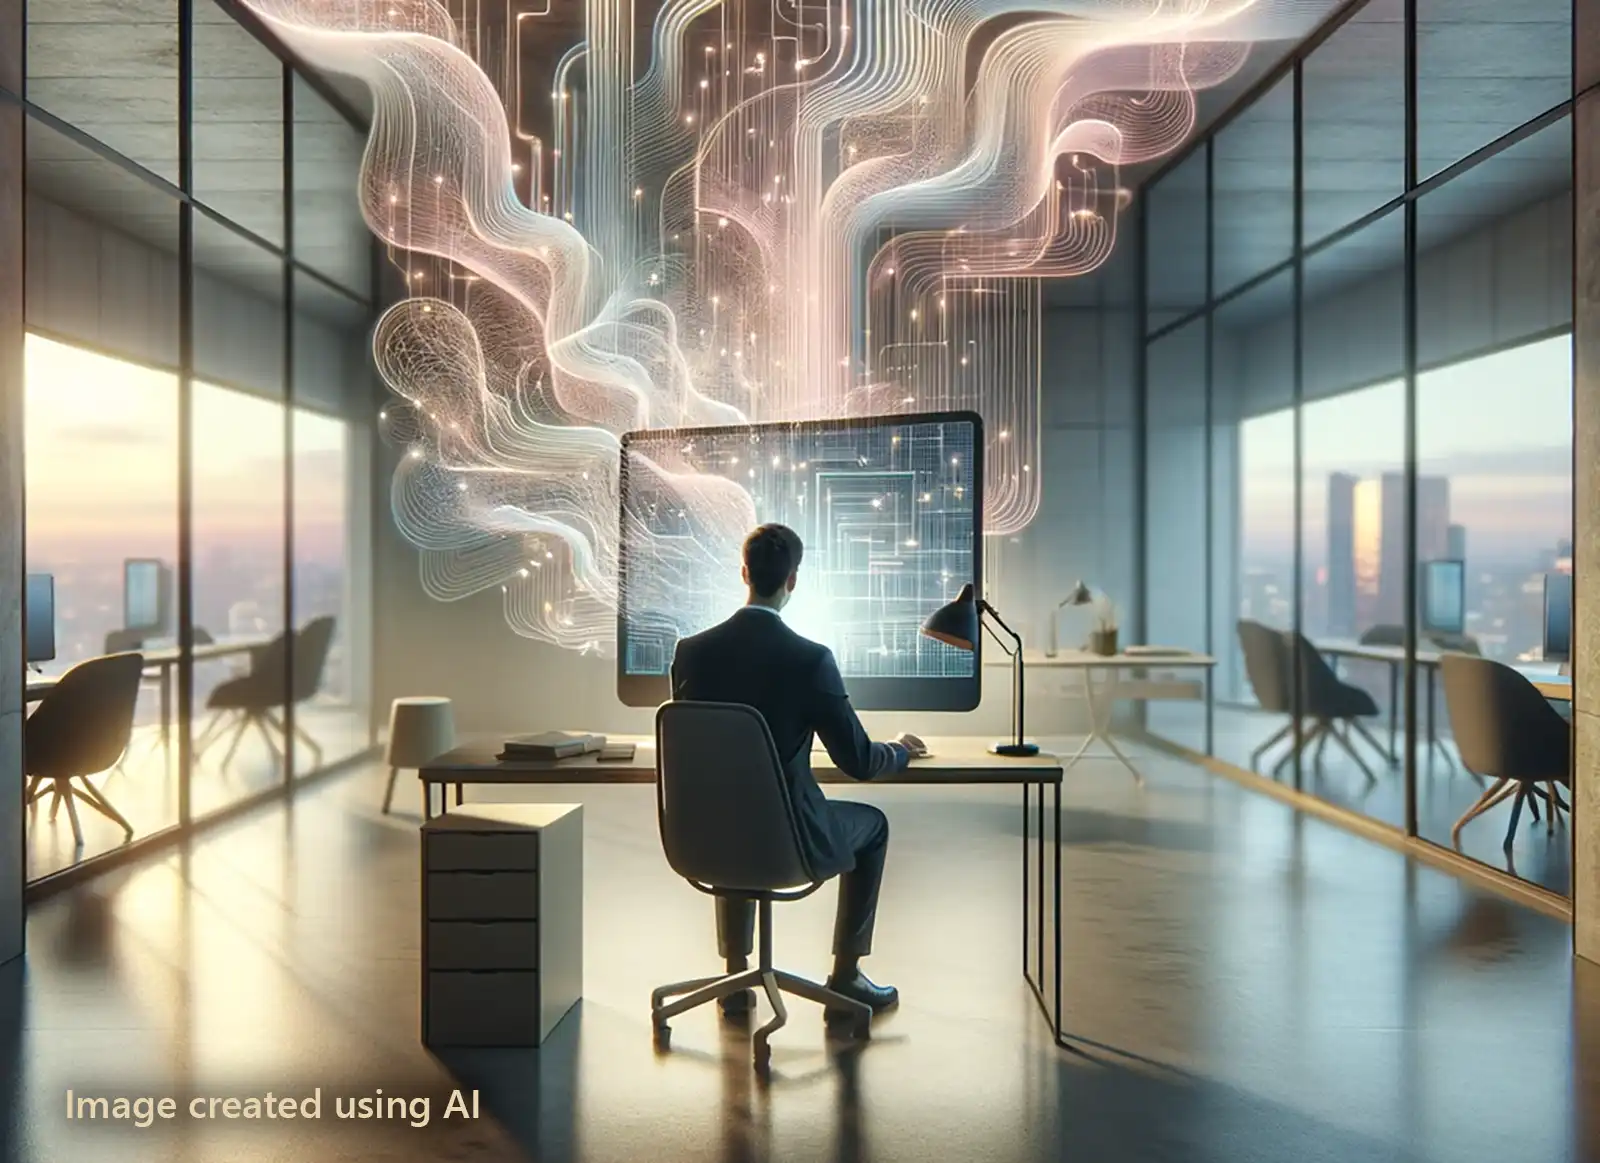 AI generated image: A man sits at a desk in an empty office, and out of his computer screen flow thousands of glowing lines representing information spreading uncontrollably.